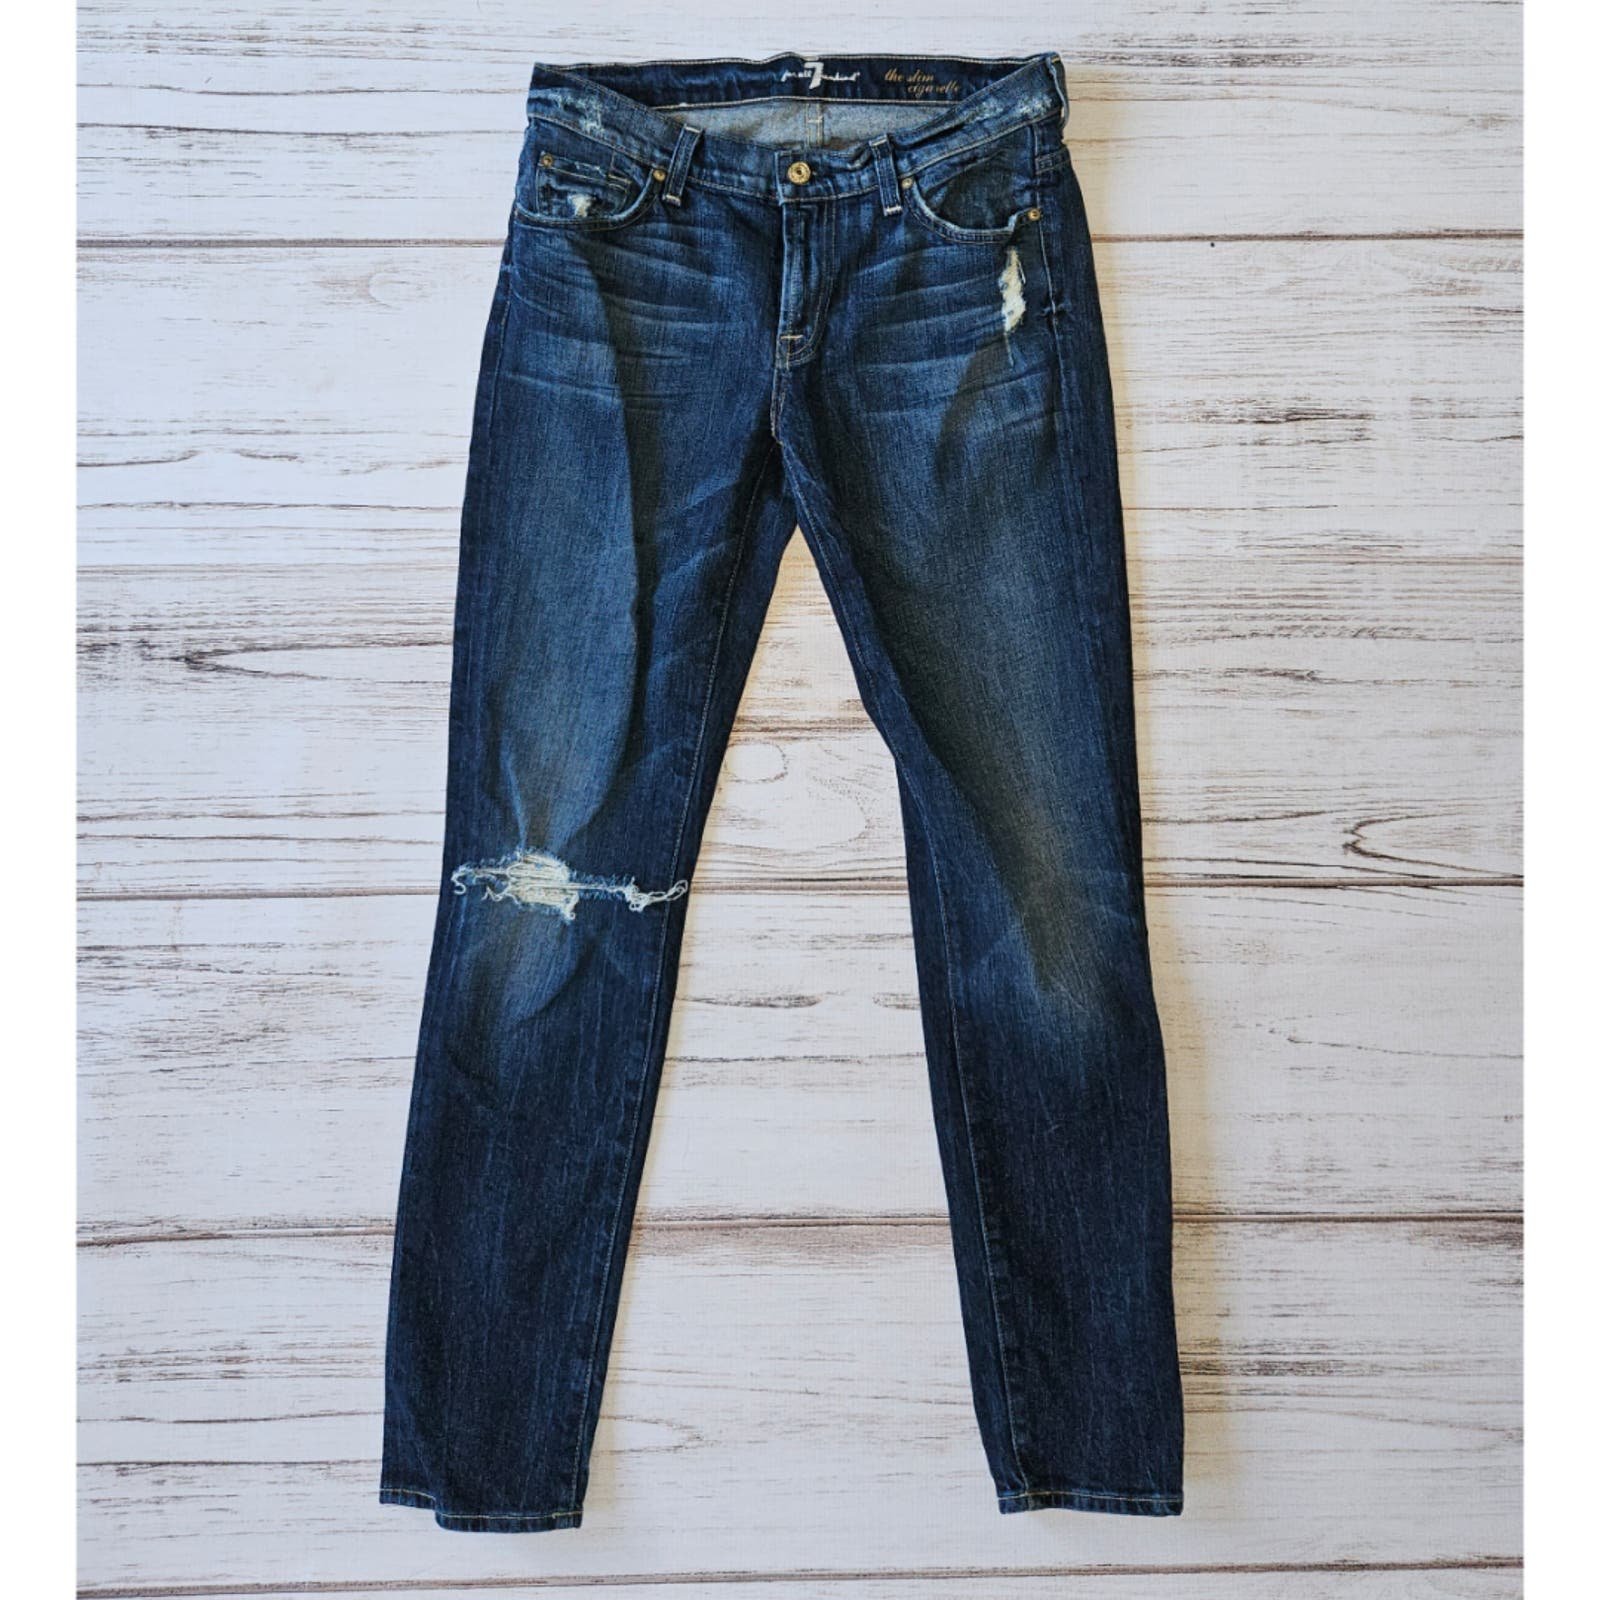 Stylish 7 for All Mankind The Slim Cigarette Distressed